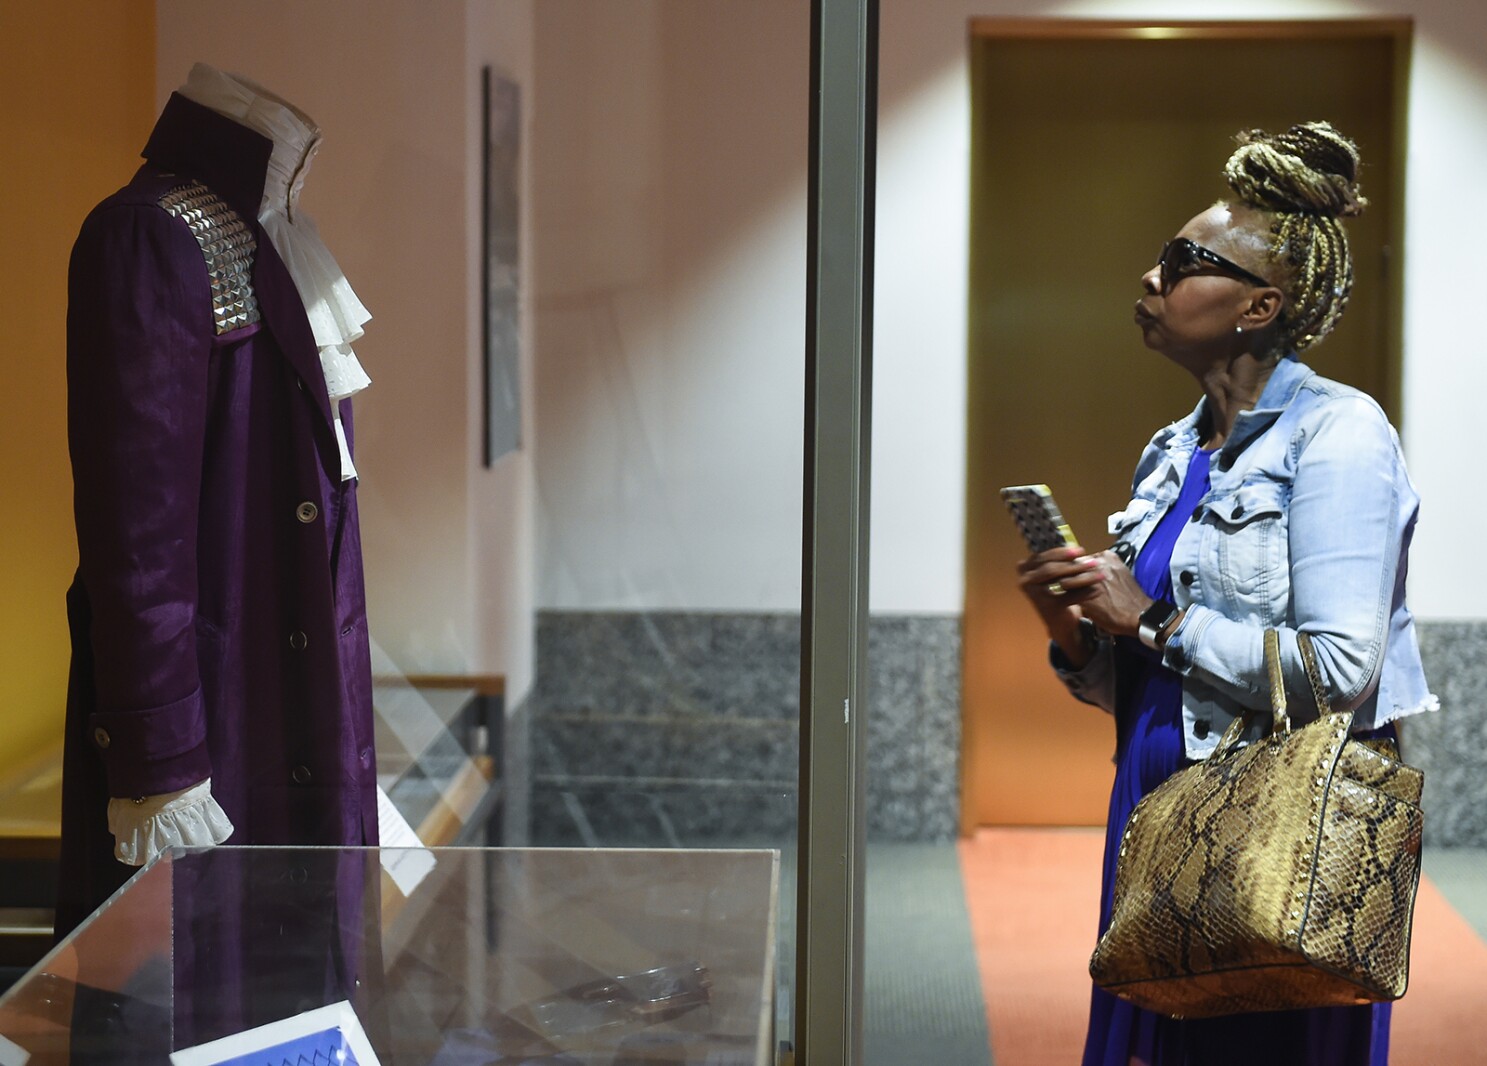  Prince's iconic outfit from 'Purple Rain' on display at Minnesota History Center 